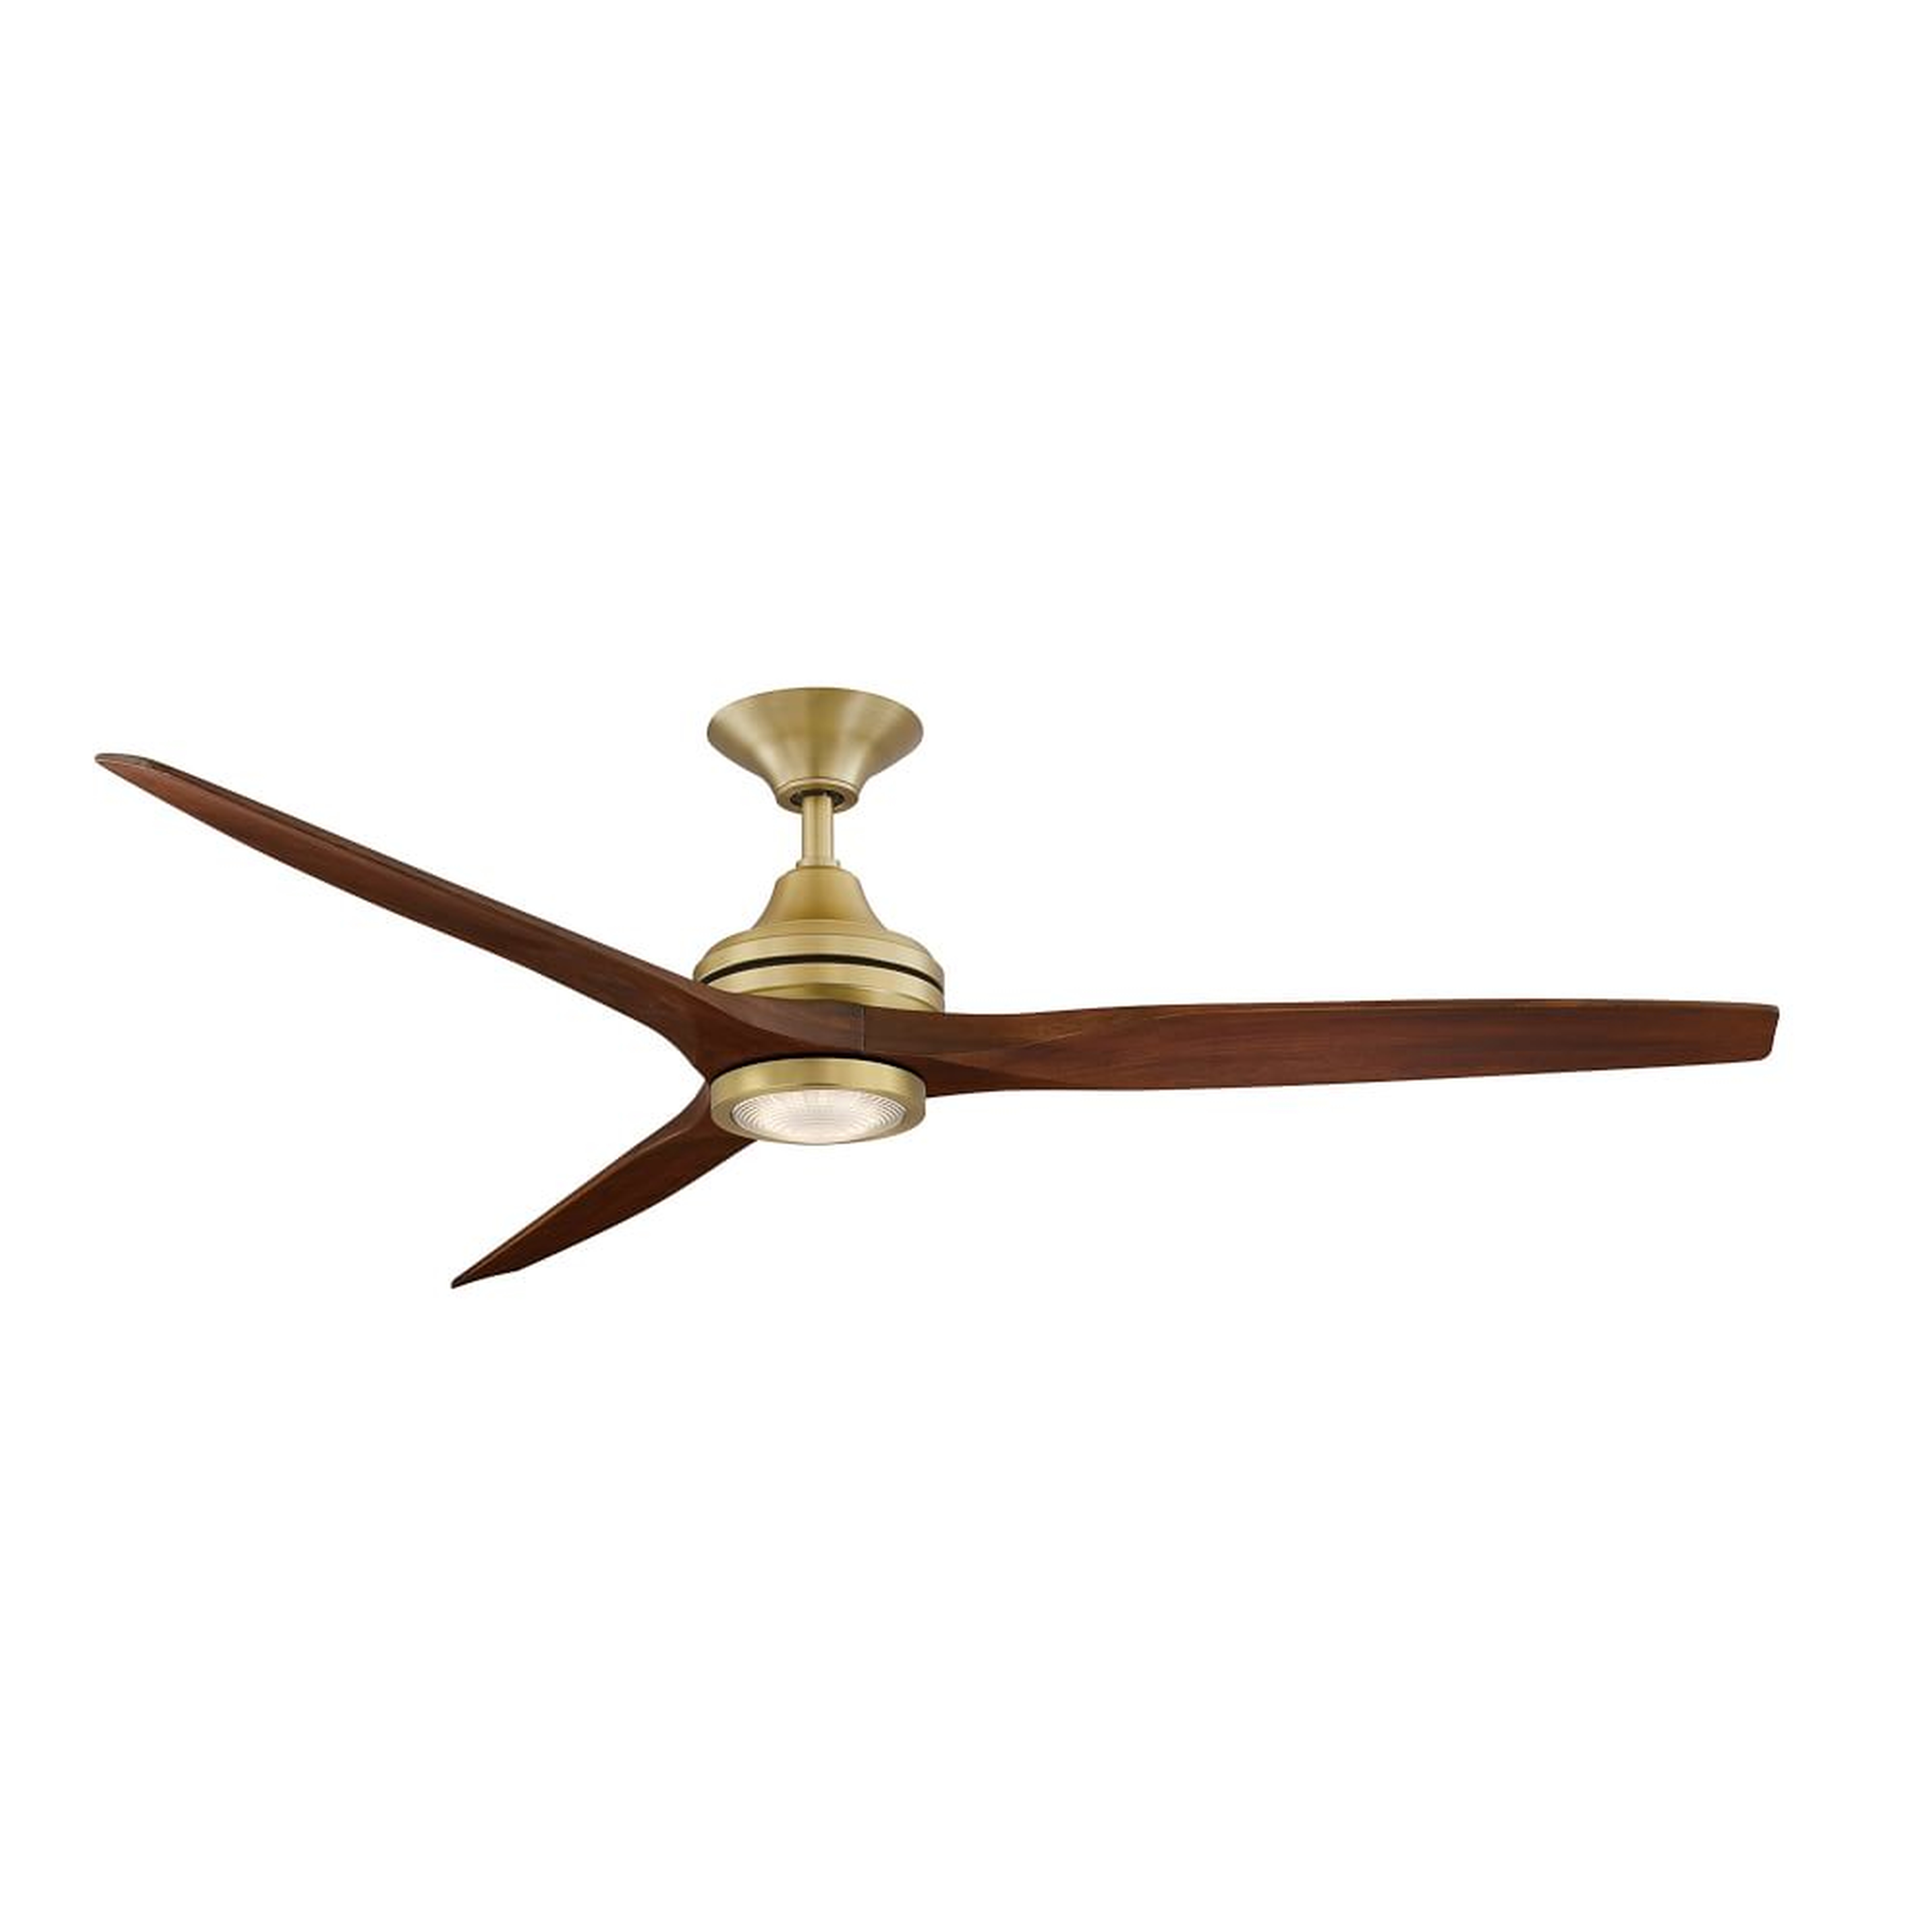 Curved Wood + Metal Ceiling Fan, 18W Led, Polished Brass/Whiskey Wood - West Elm